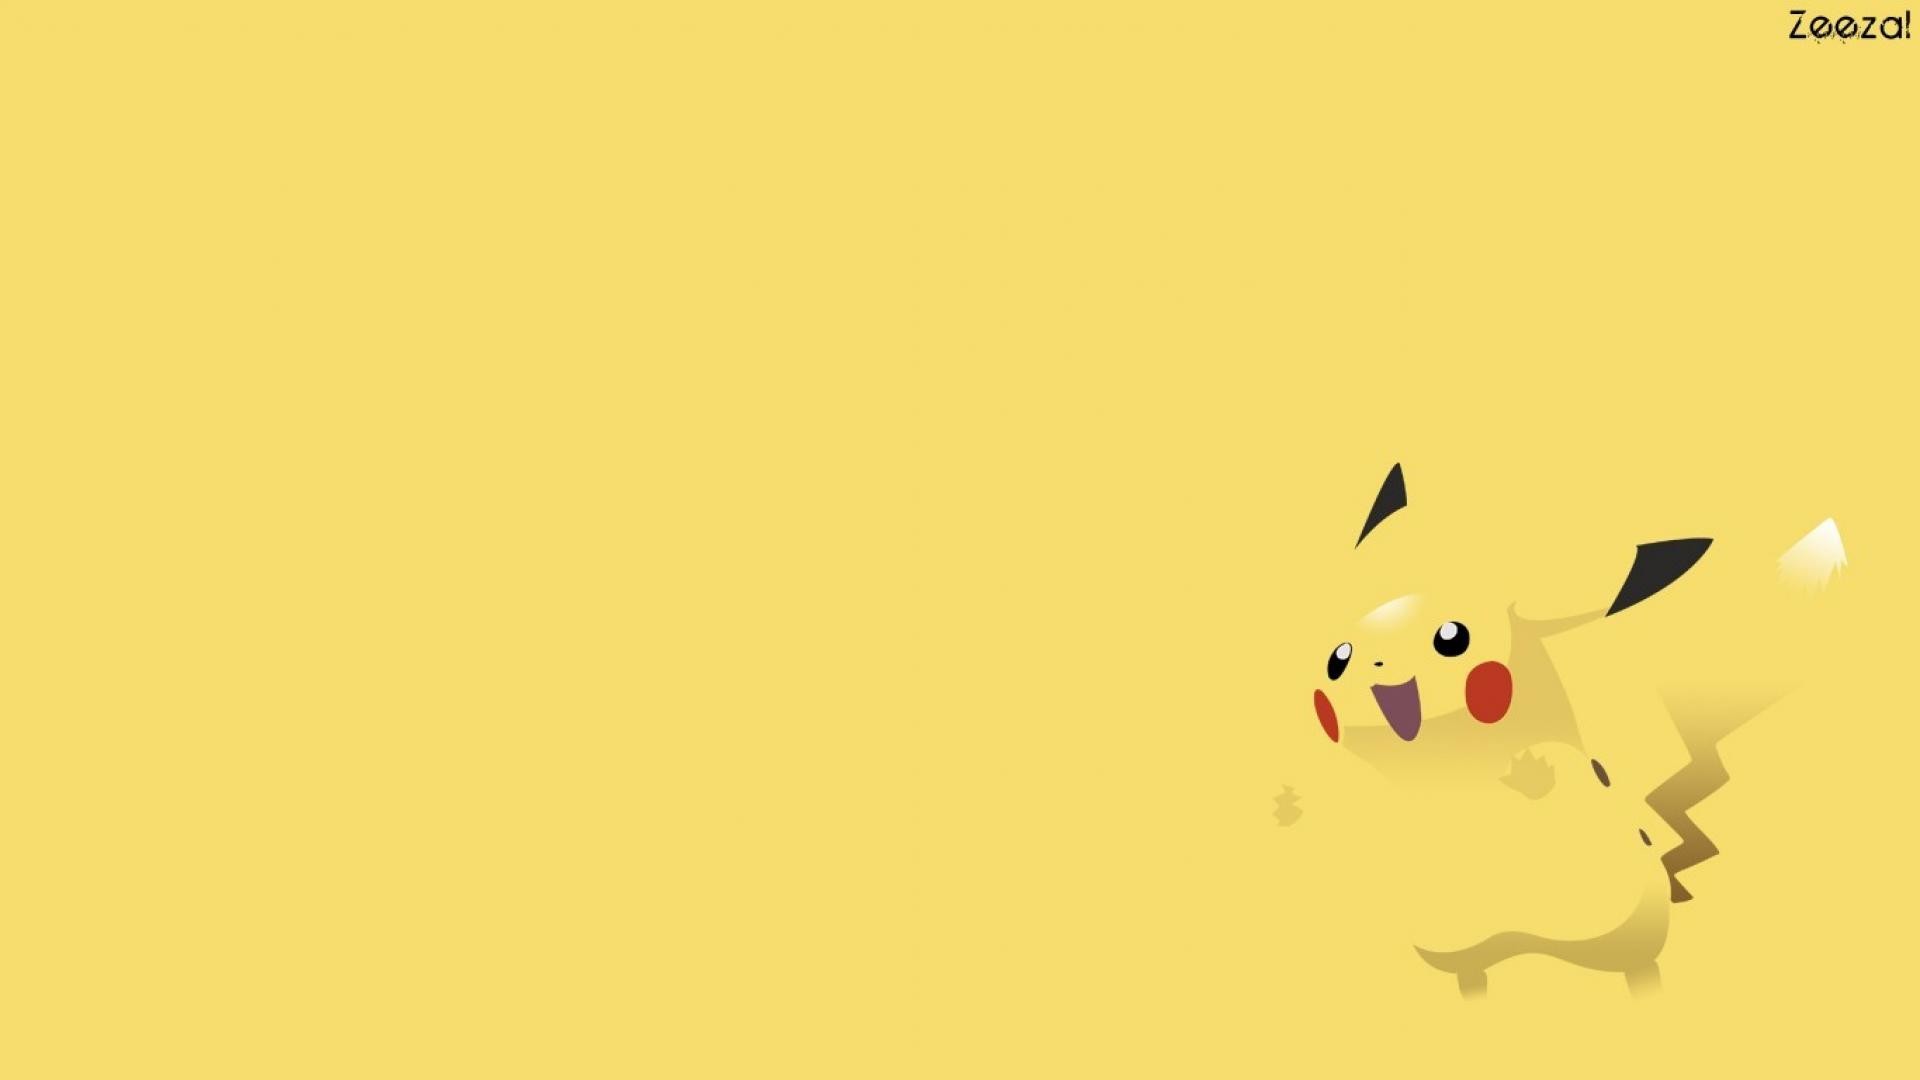 Pikachu Wallpapers 71 Pictures